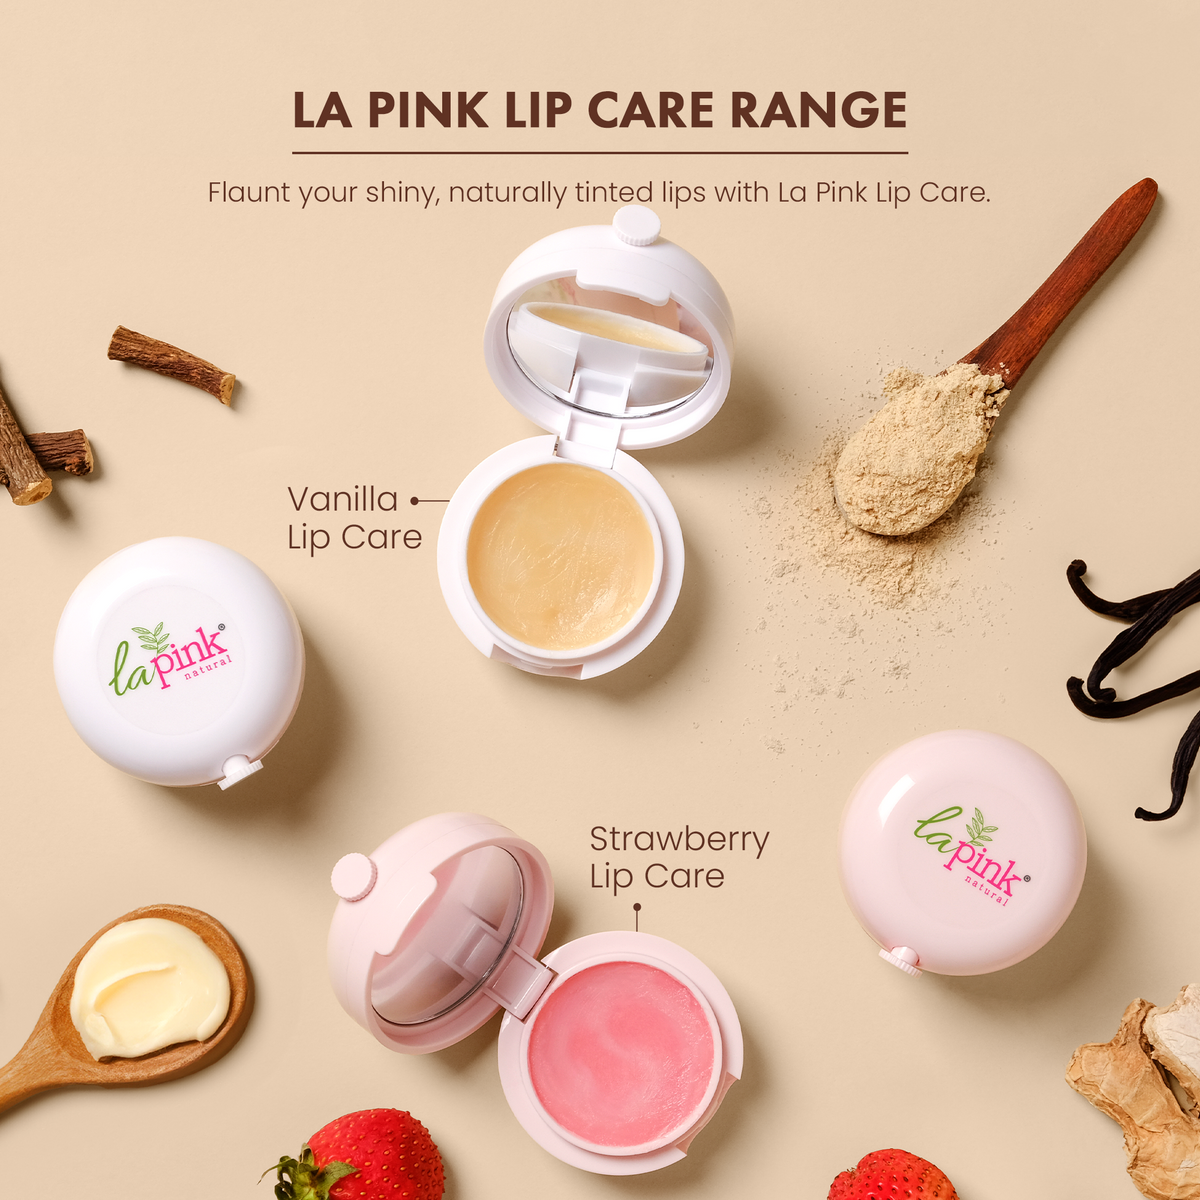 La Pink Strawberry Lip Care with White Haldi for Shiny & Natural Tint  15 gms